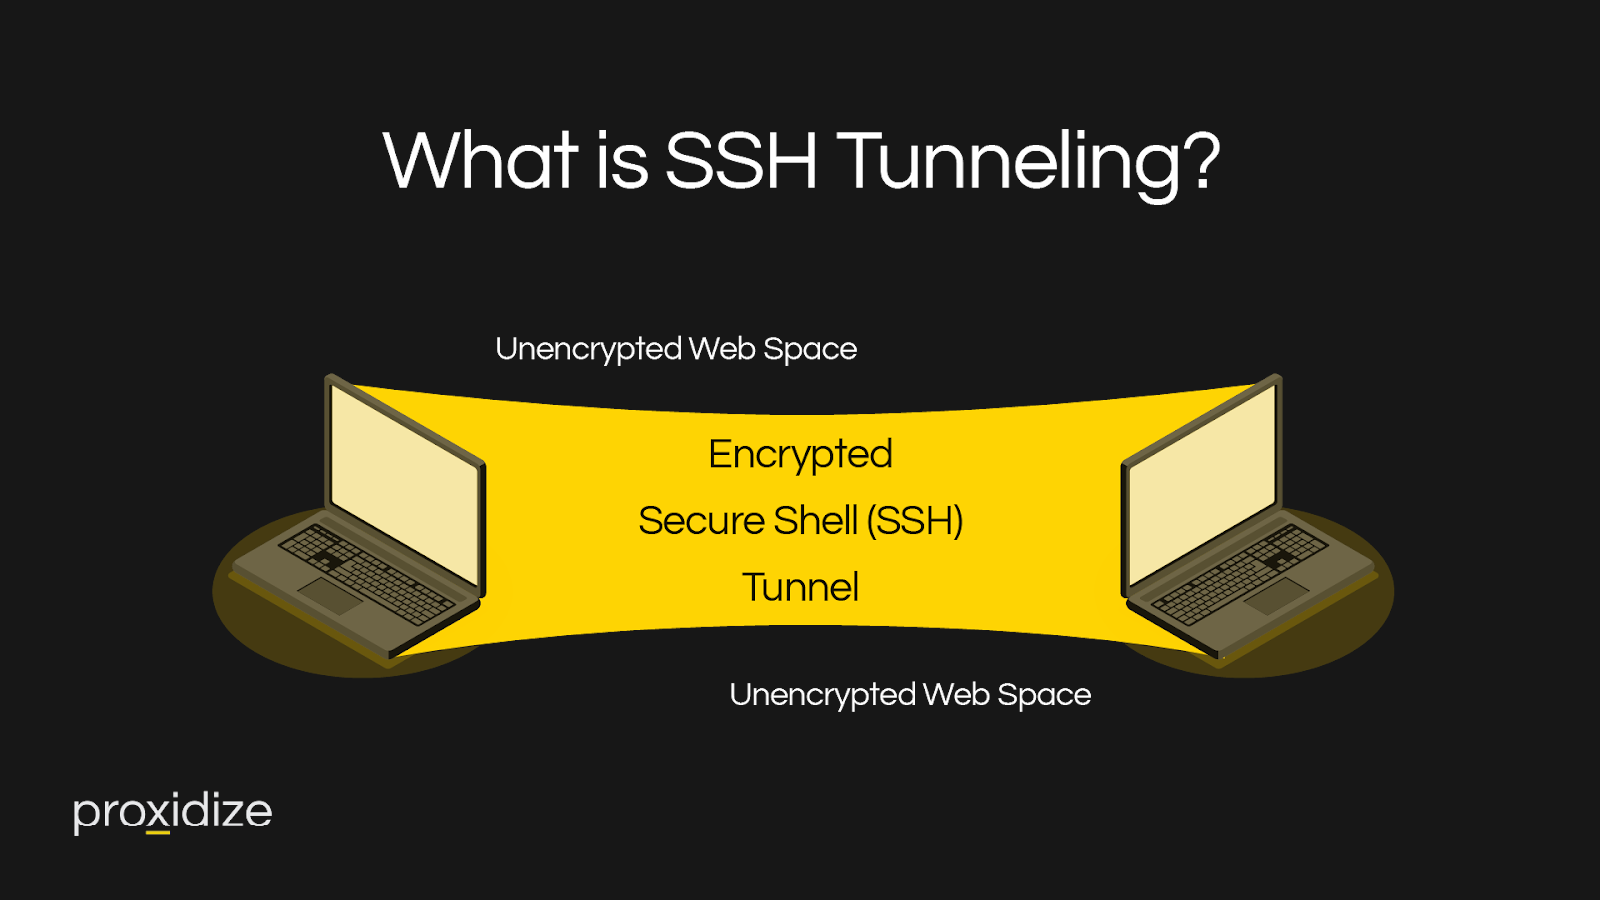 ssh tunneling